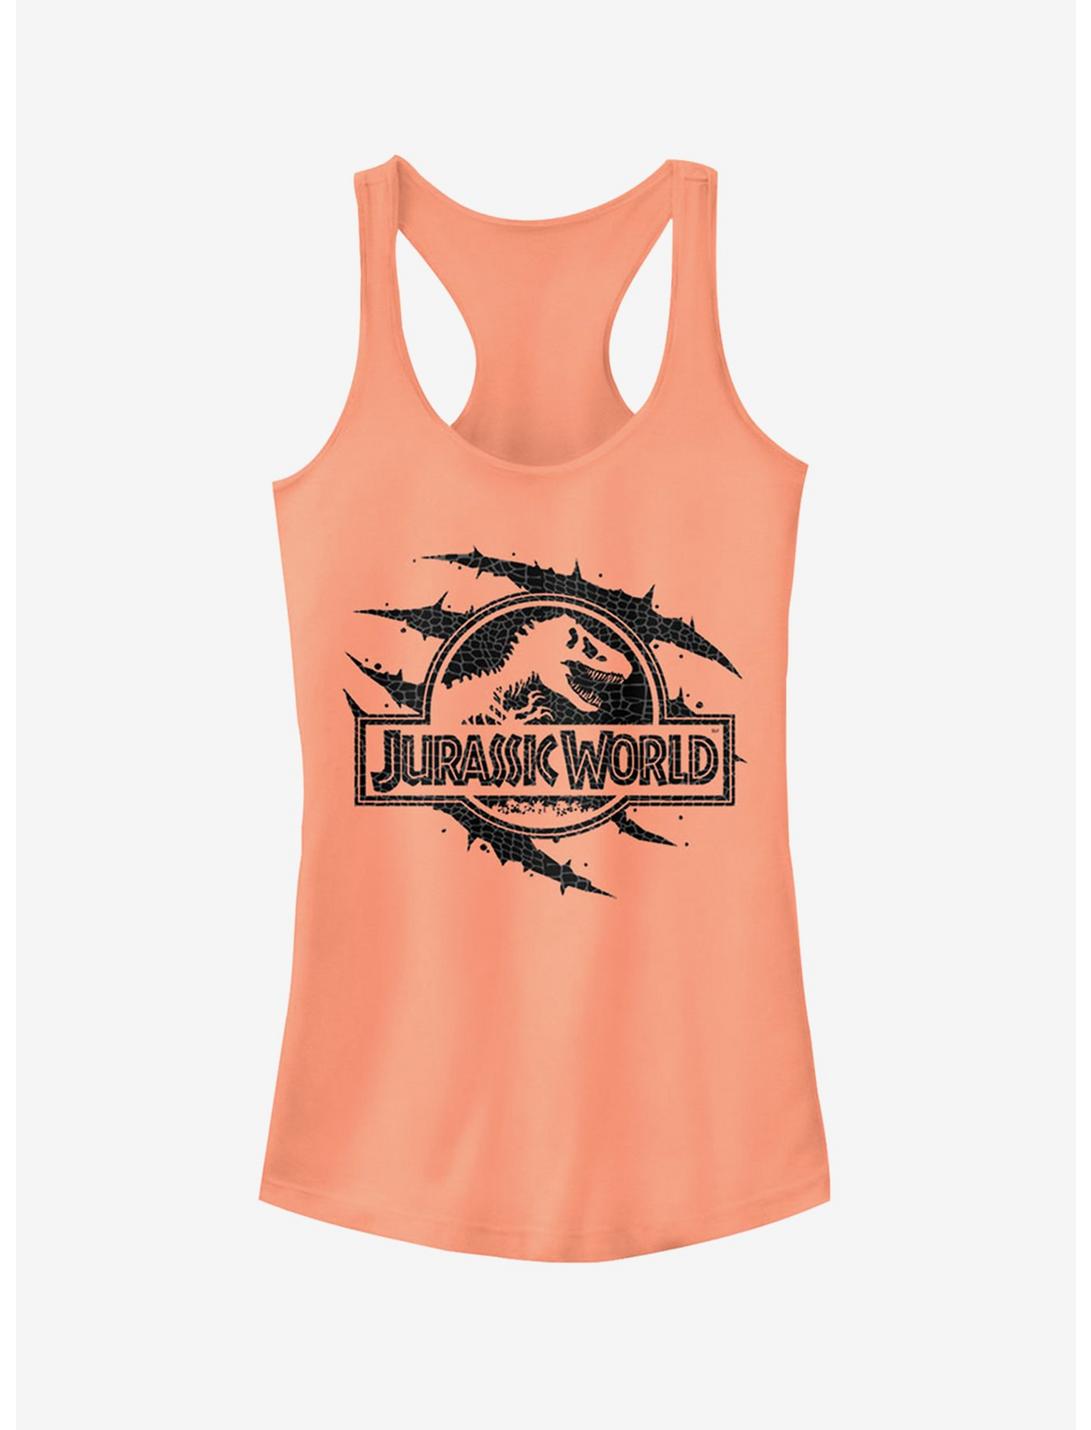 Scale Logo Claw Marks Girls Tank, , hi-res